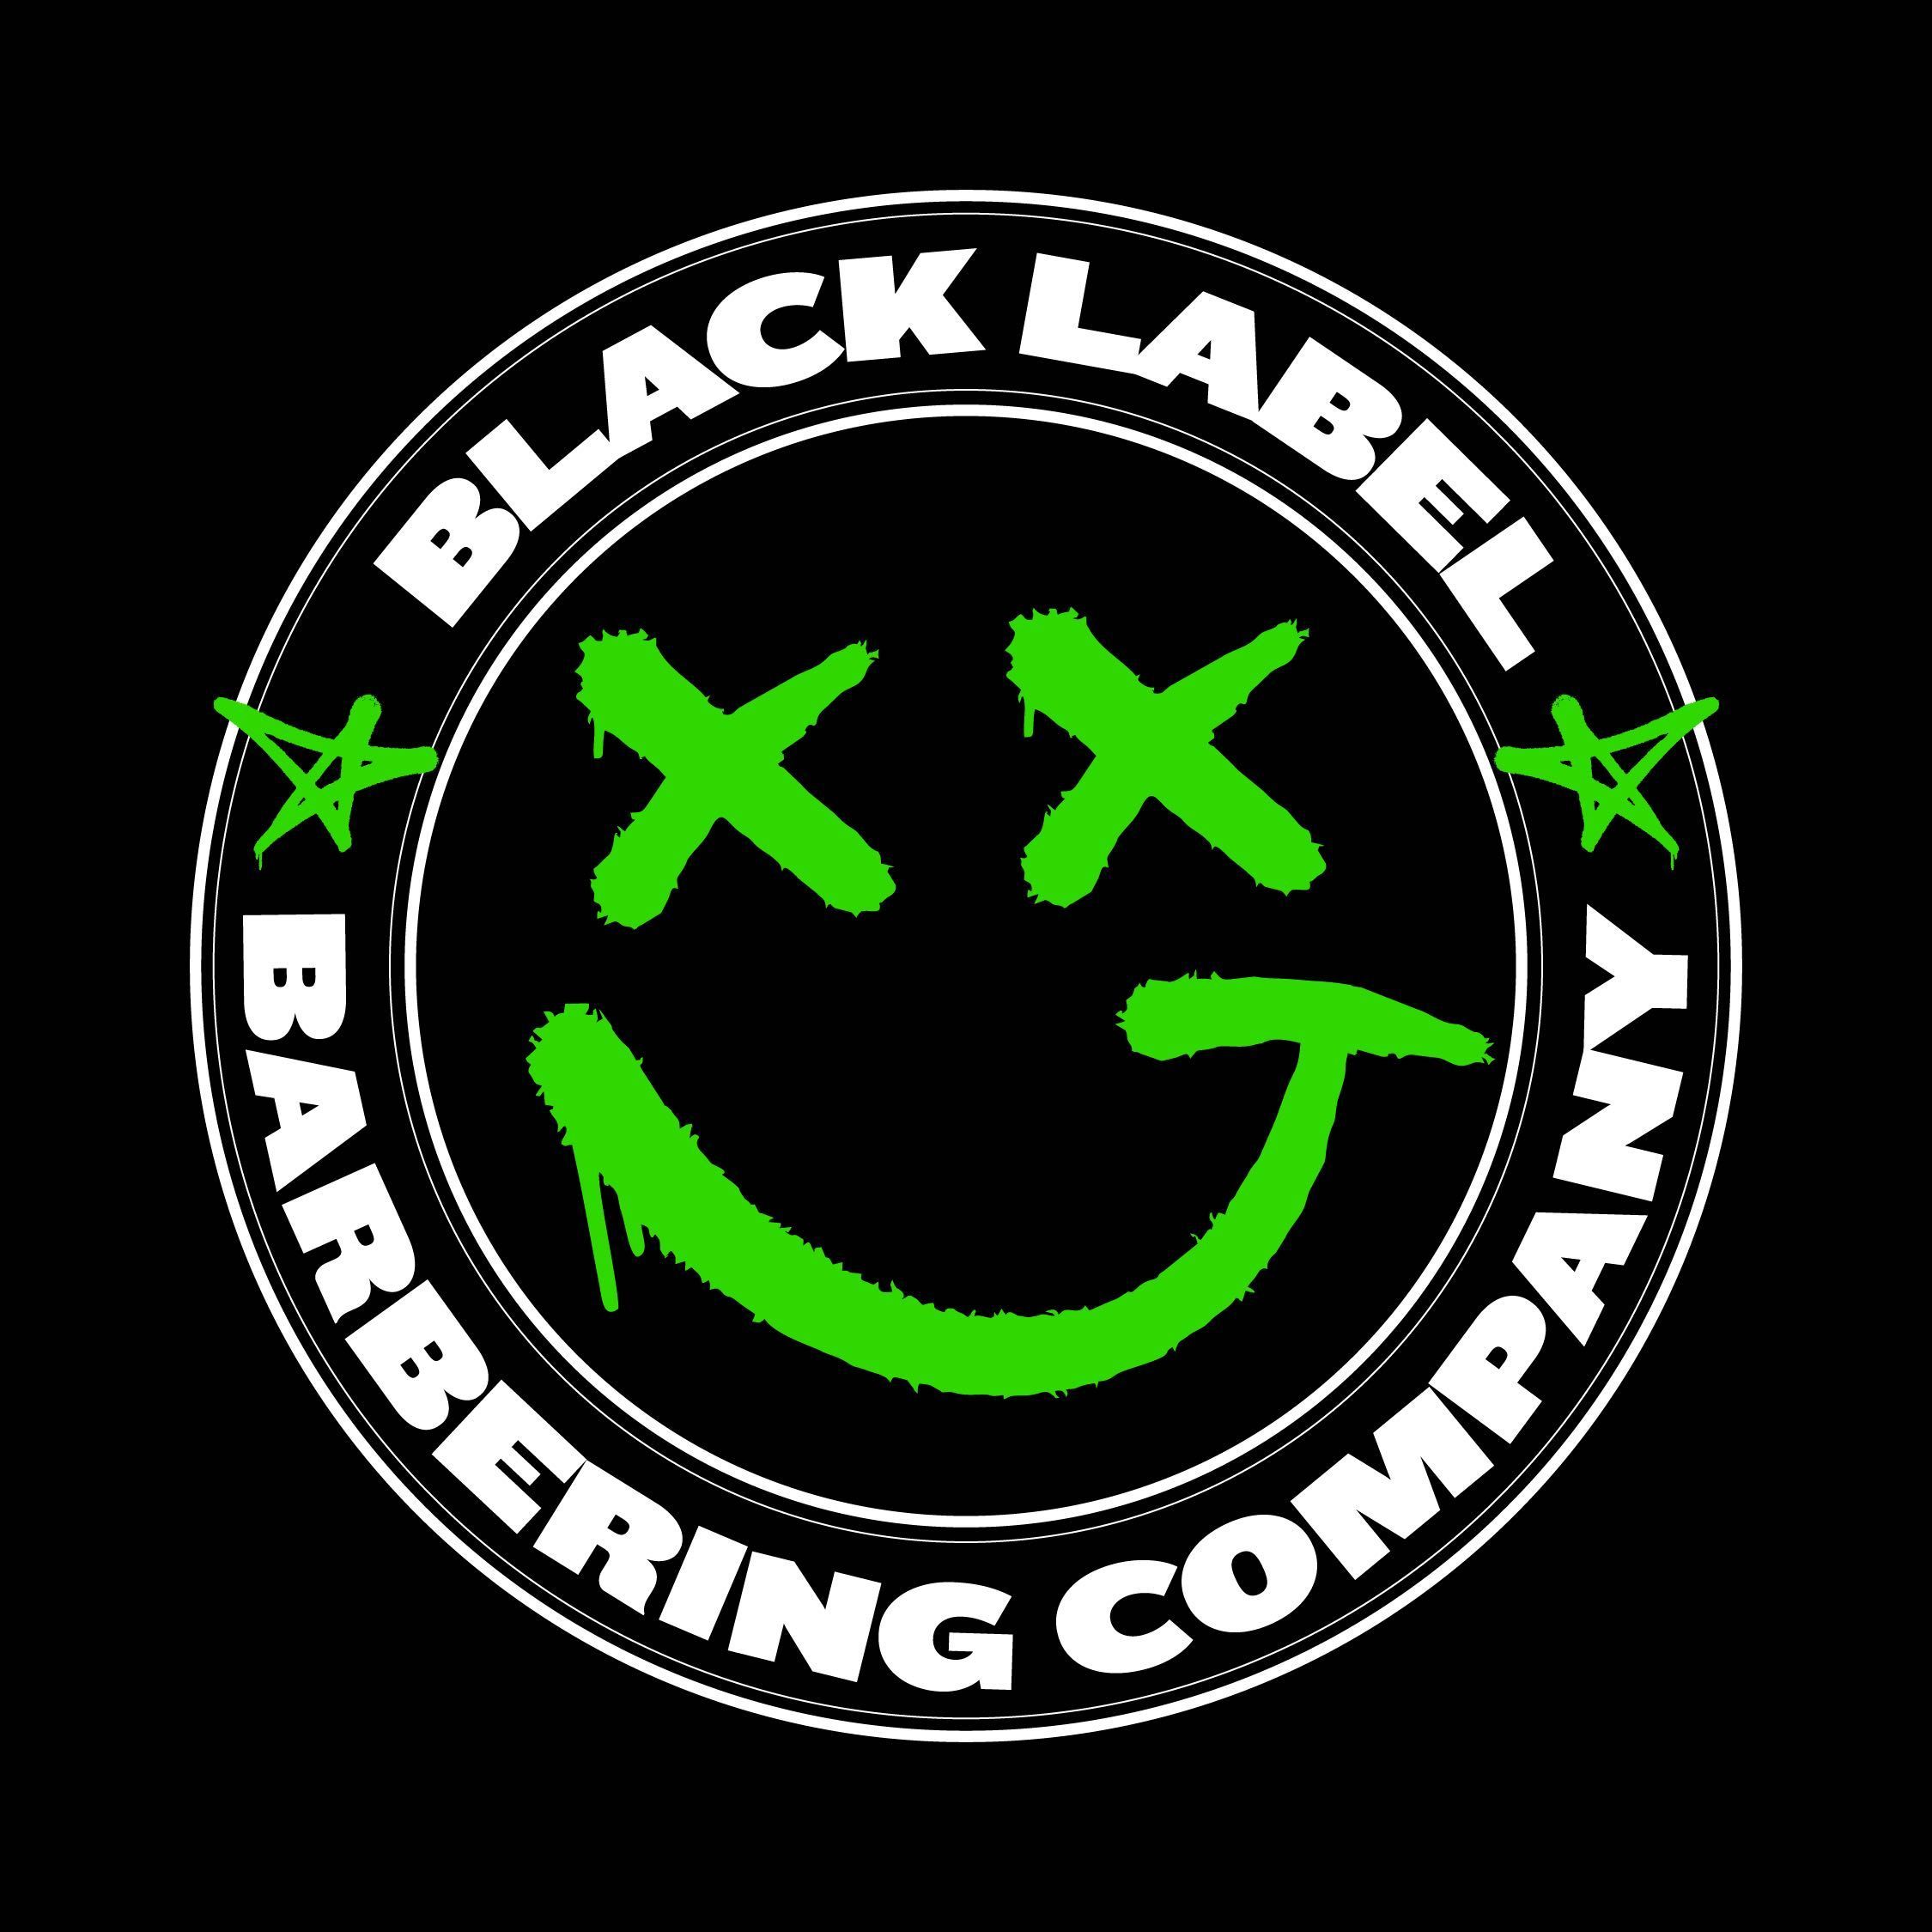 Black Label Barbering Co, 29 The Green, CV22 7LZ, Rugby